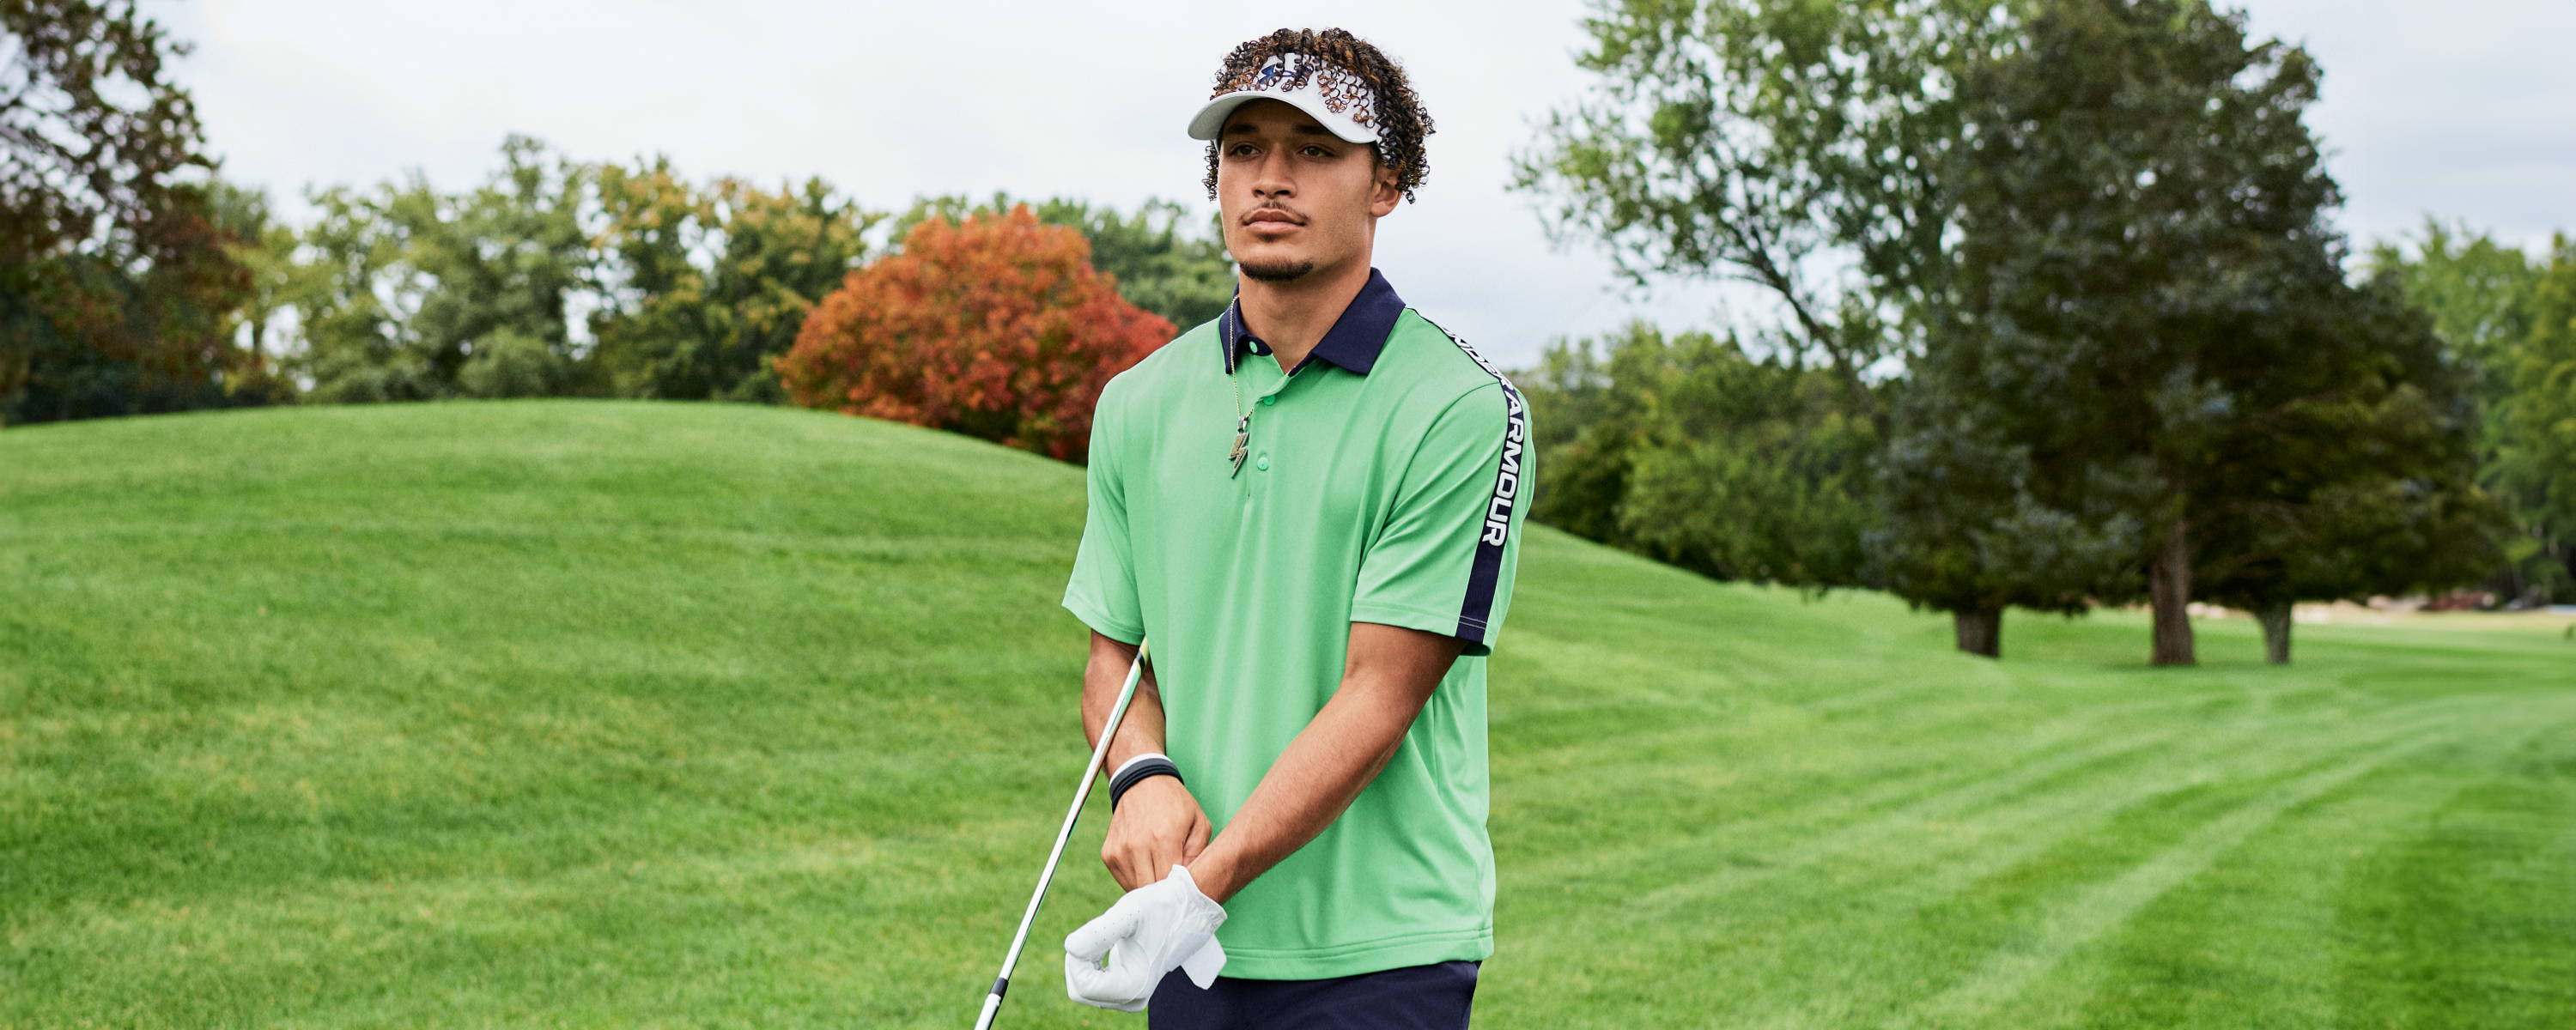 Under Armour Golf Clothing